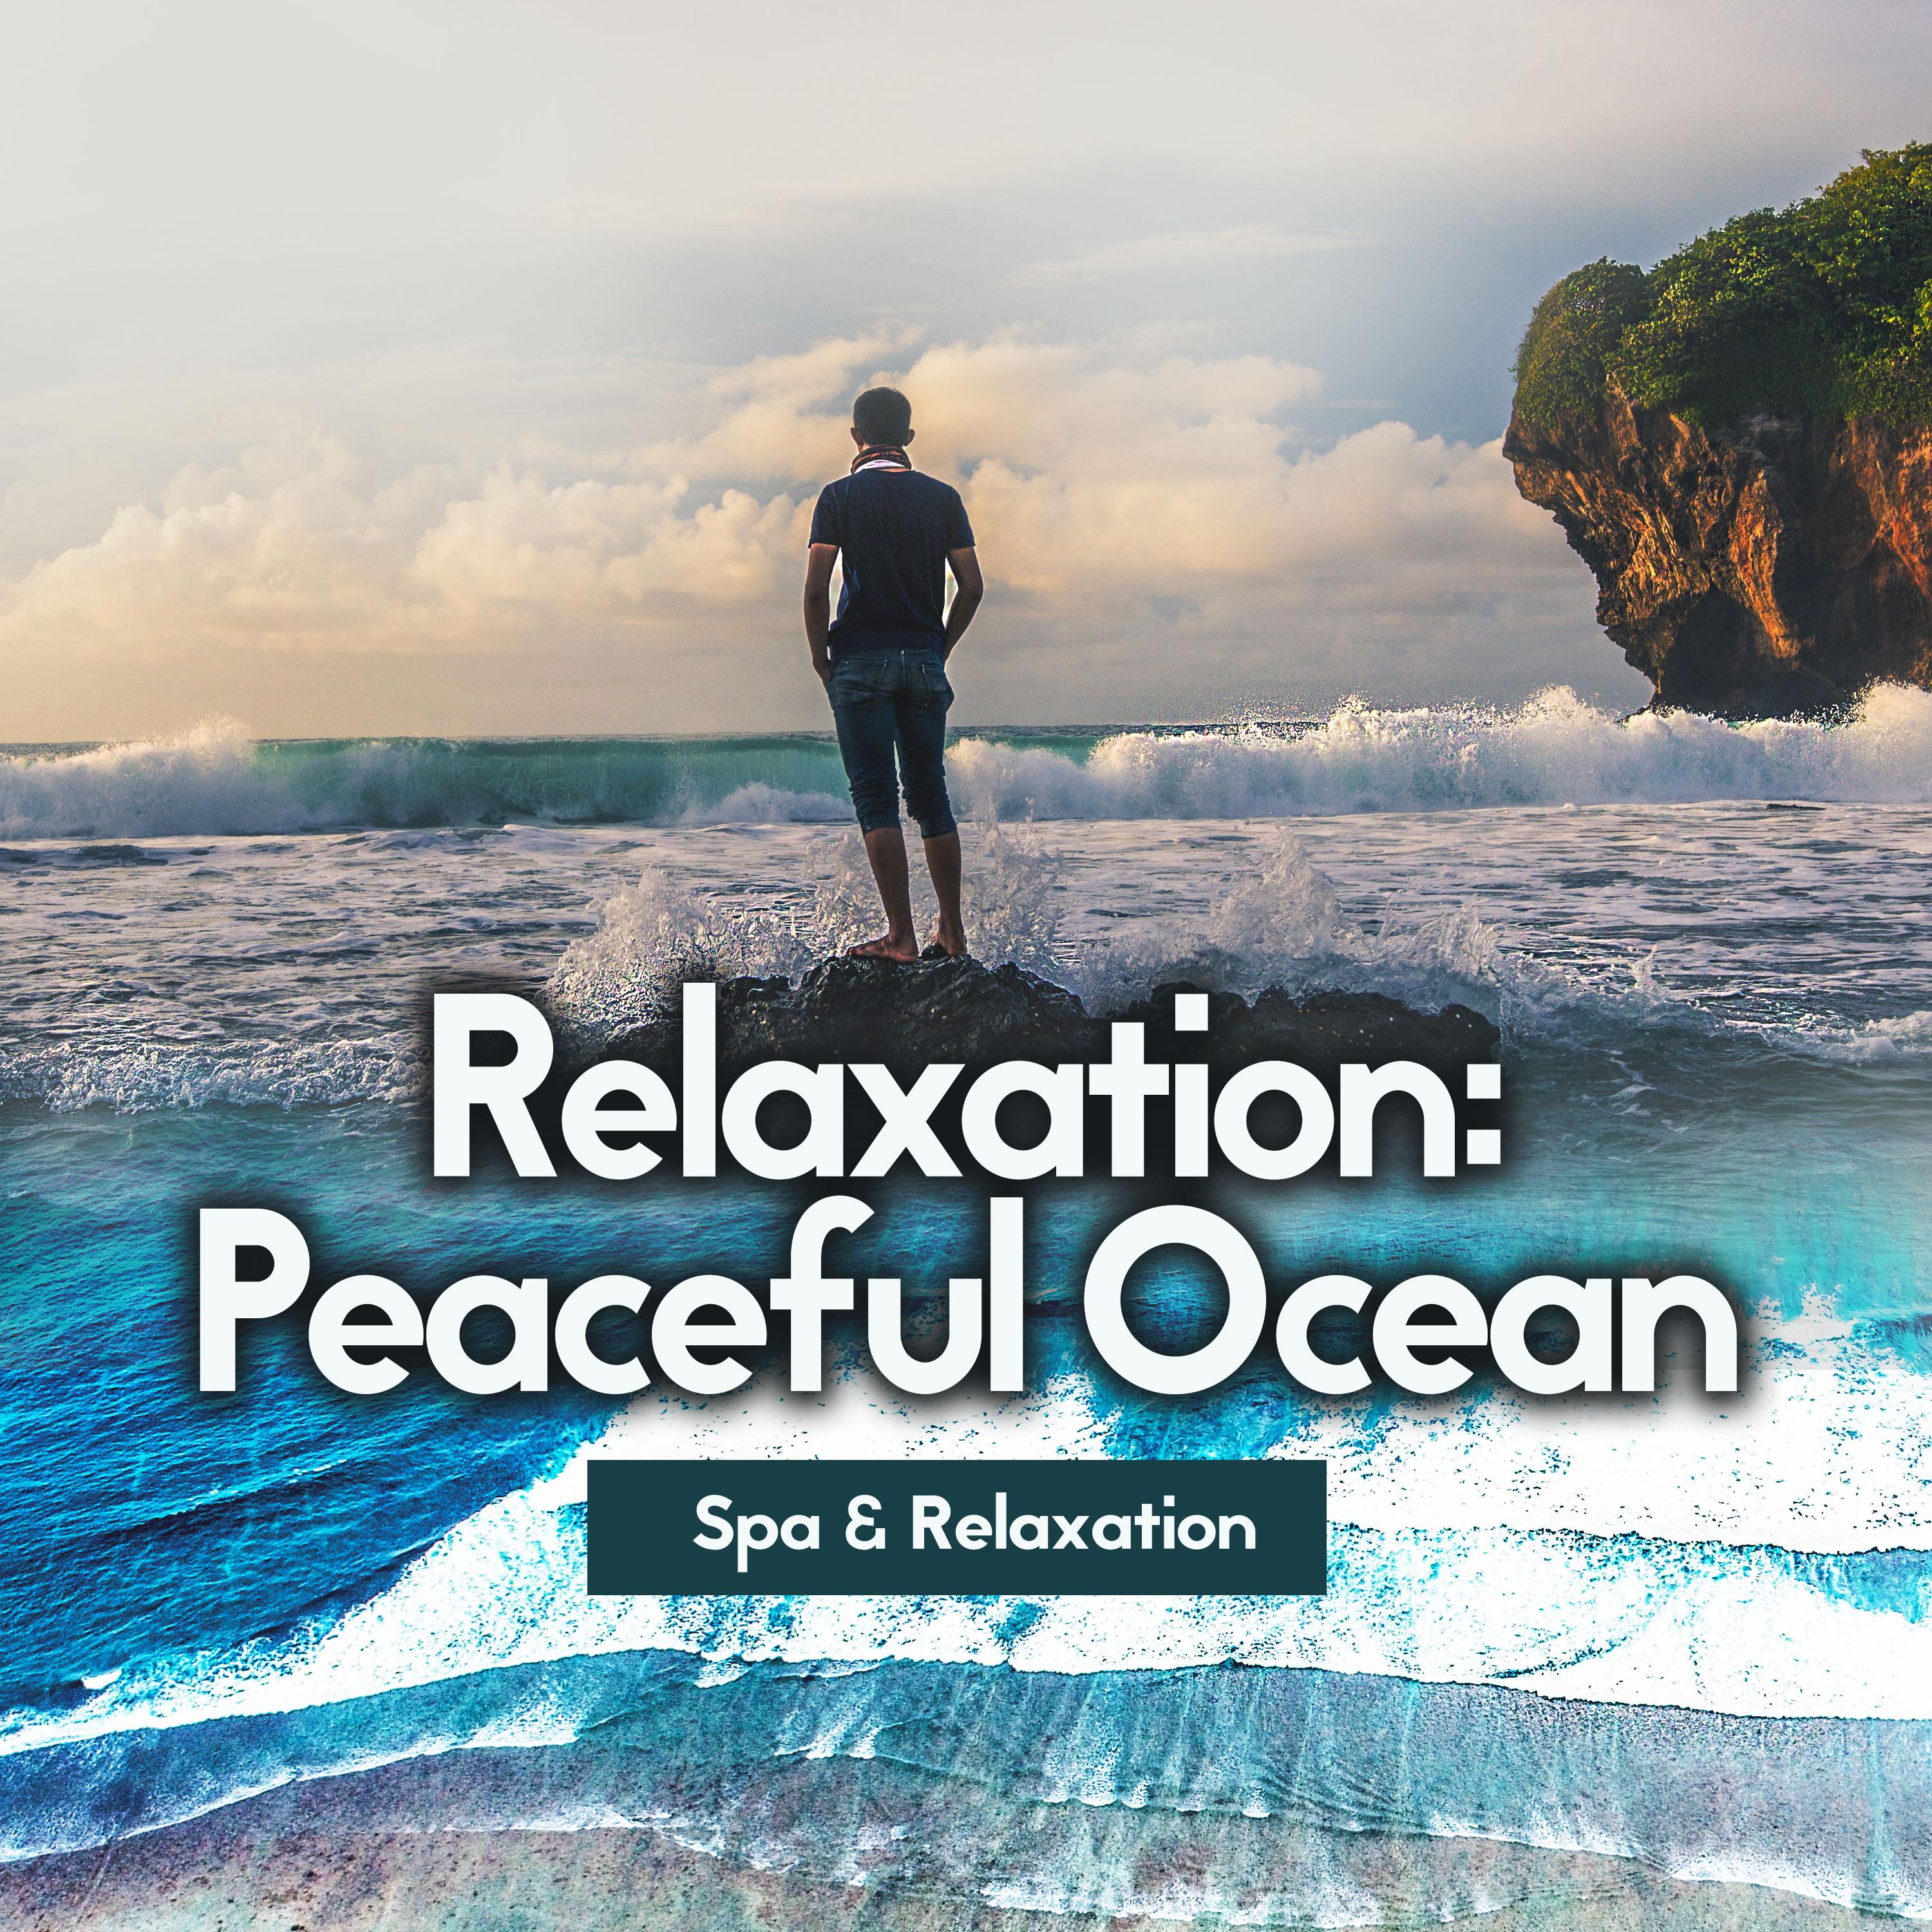 Relaxation: Peaceful Ocean